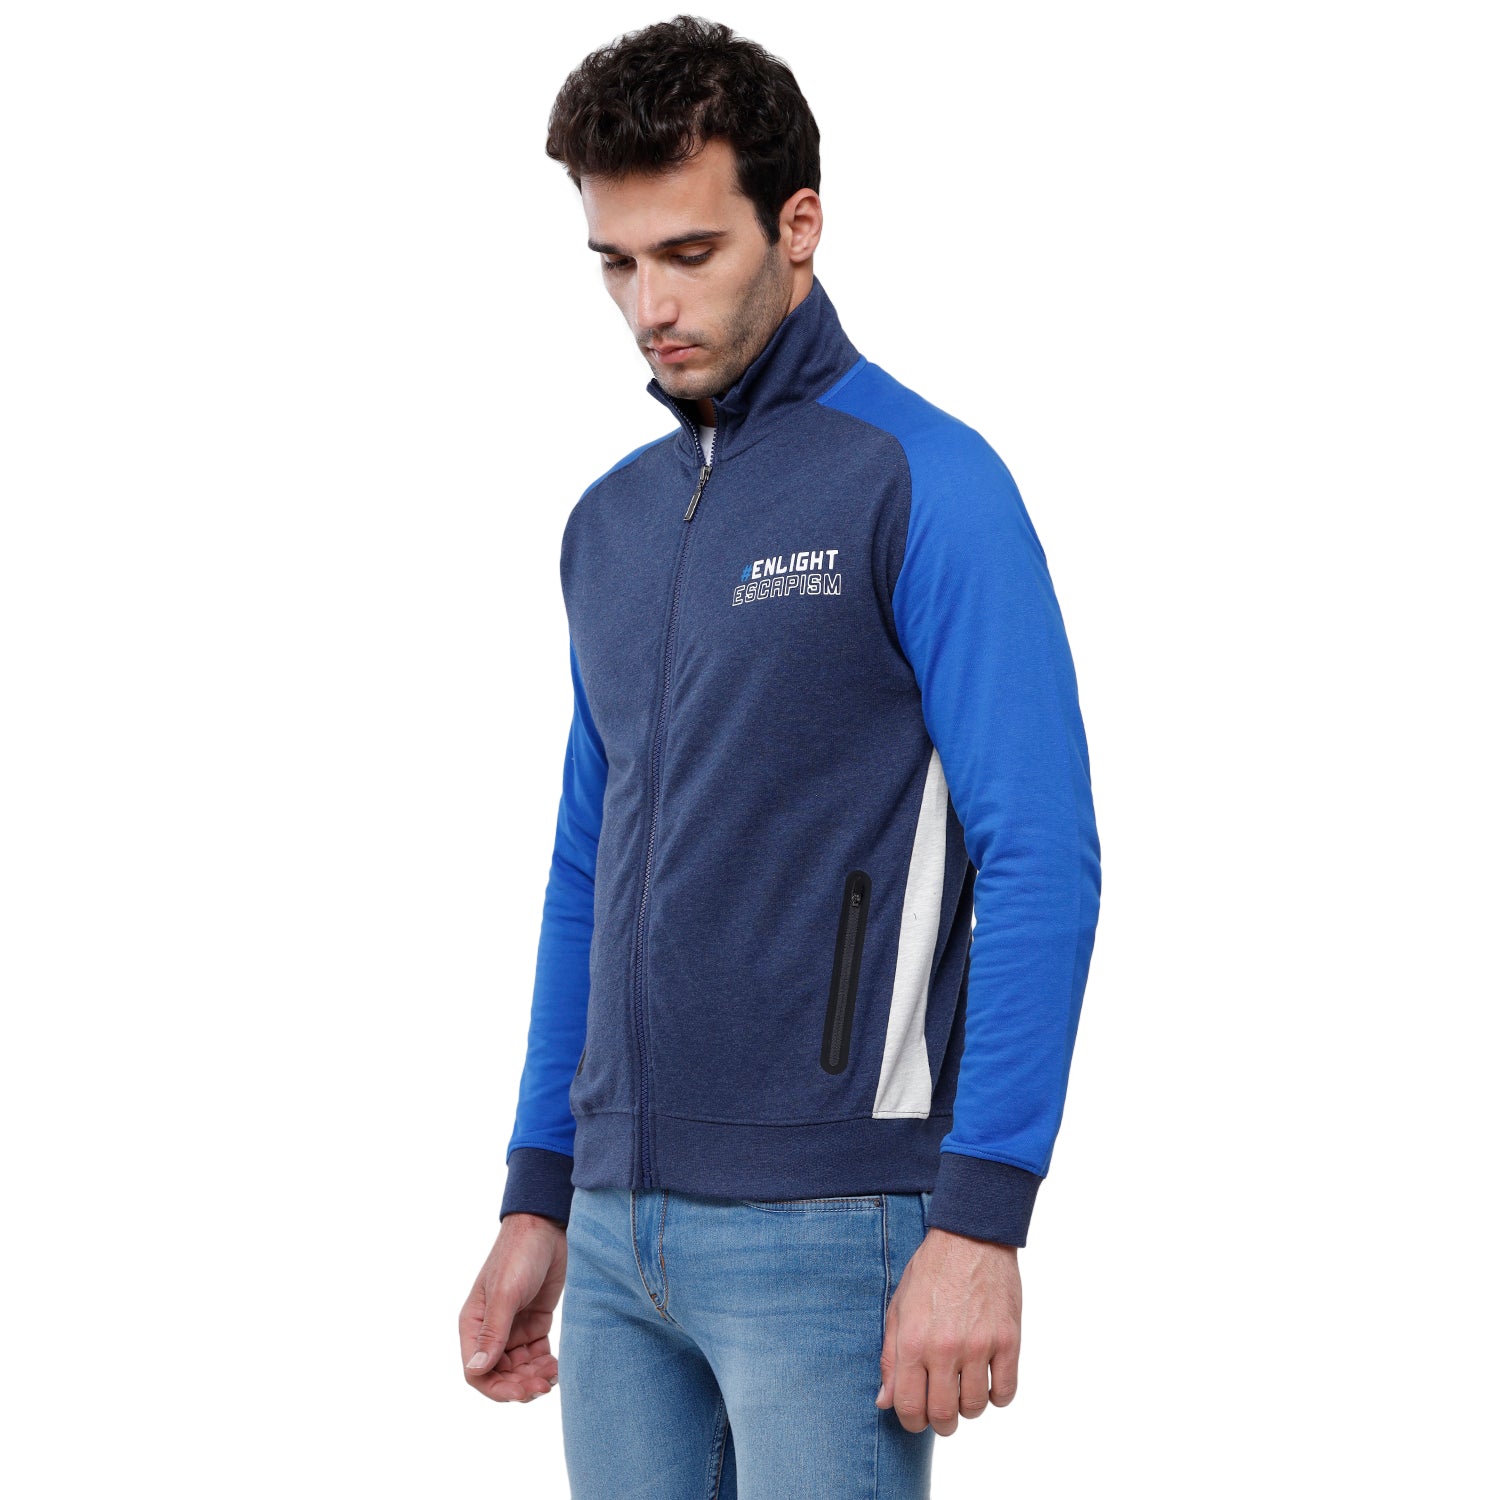 Classic Polo Men's Color Block Sporty Full Sleeve Royal Blue High neck Sweat Shirt - CPSS-323A Sweat Shirts Classic Polo 